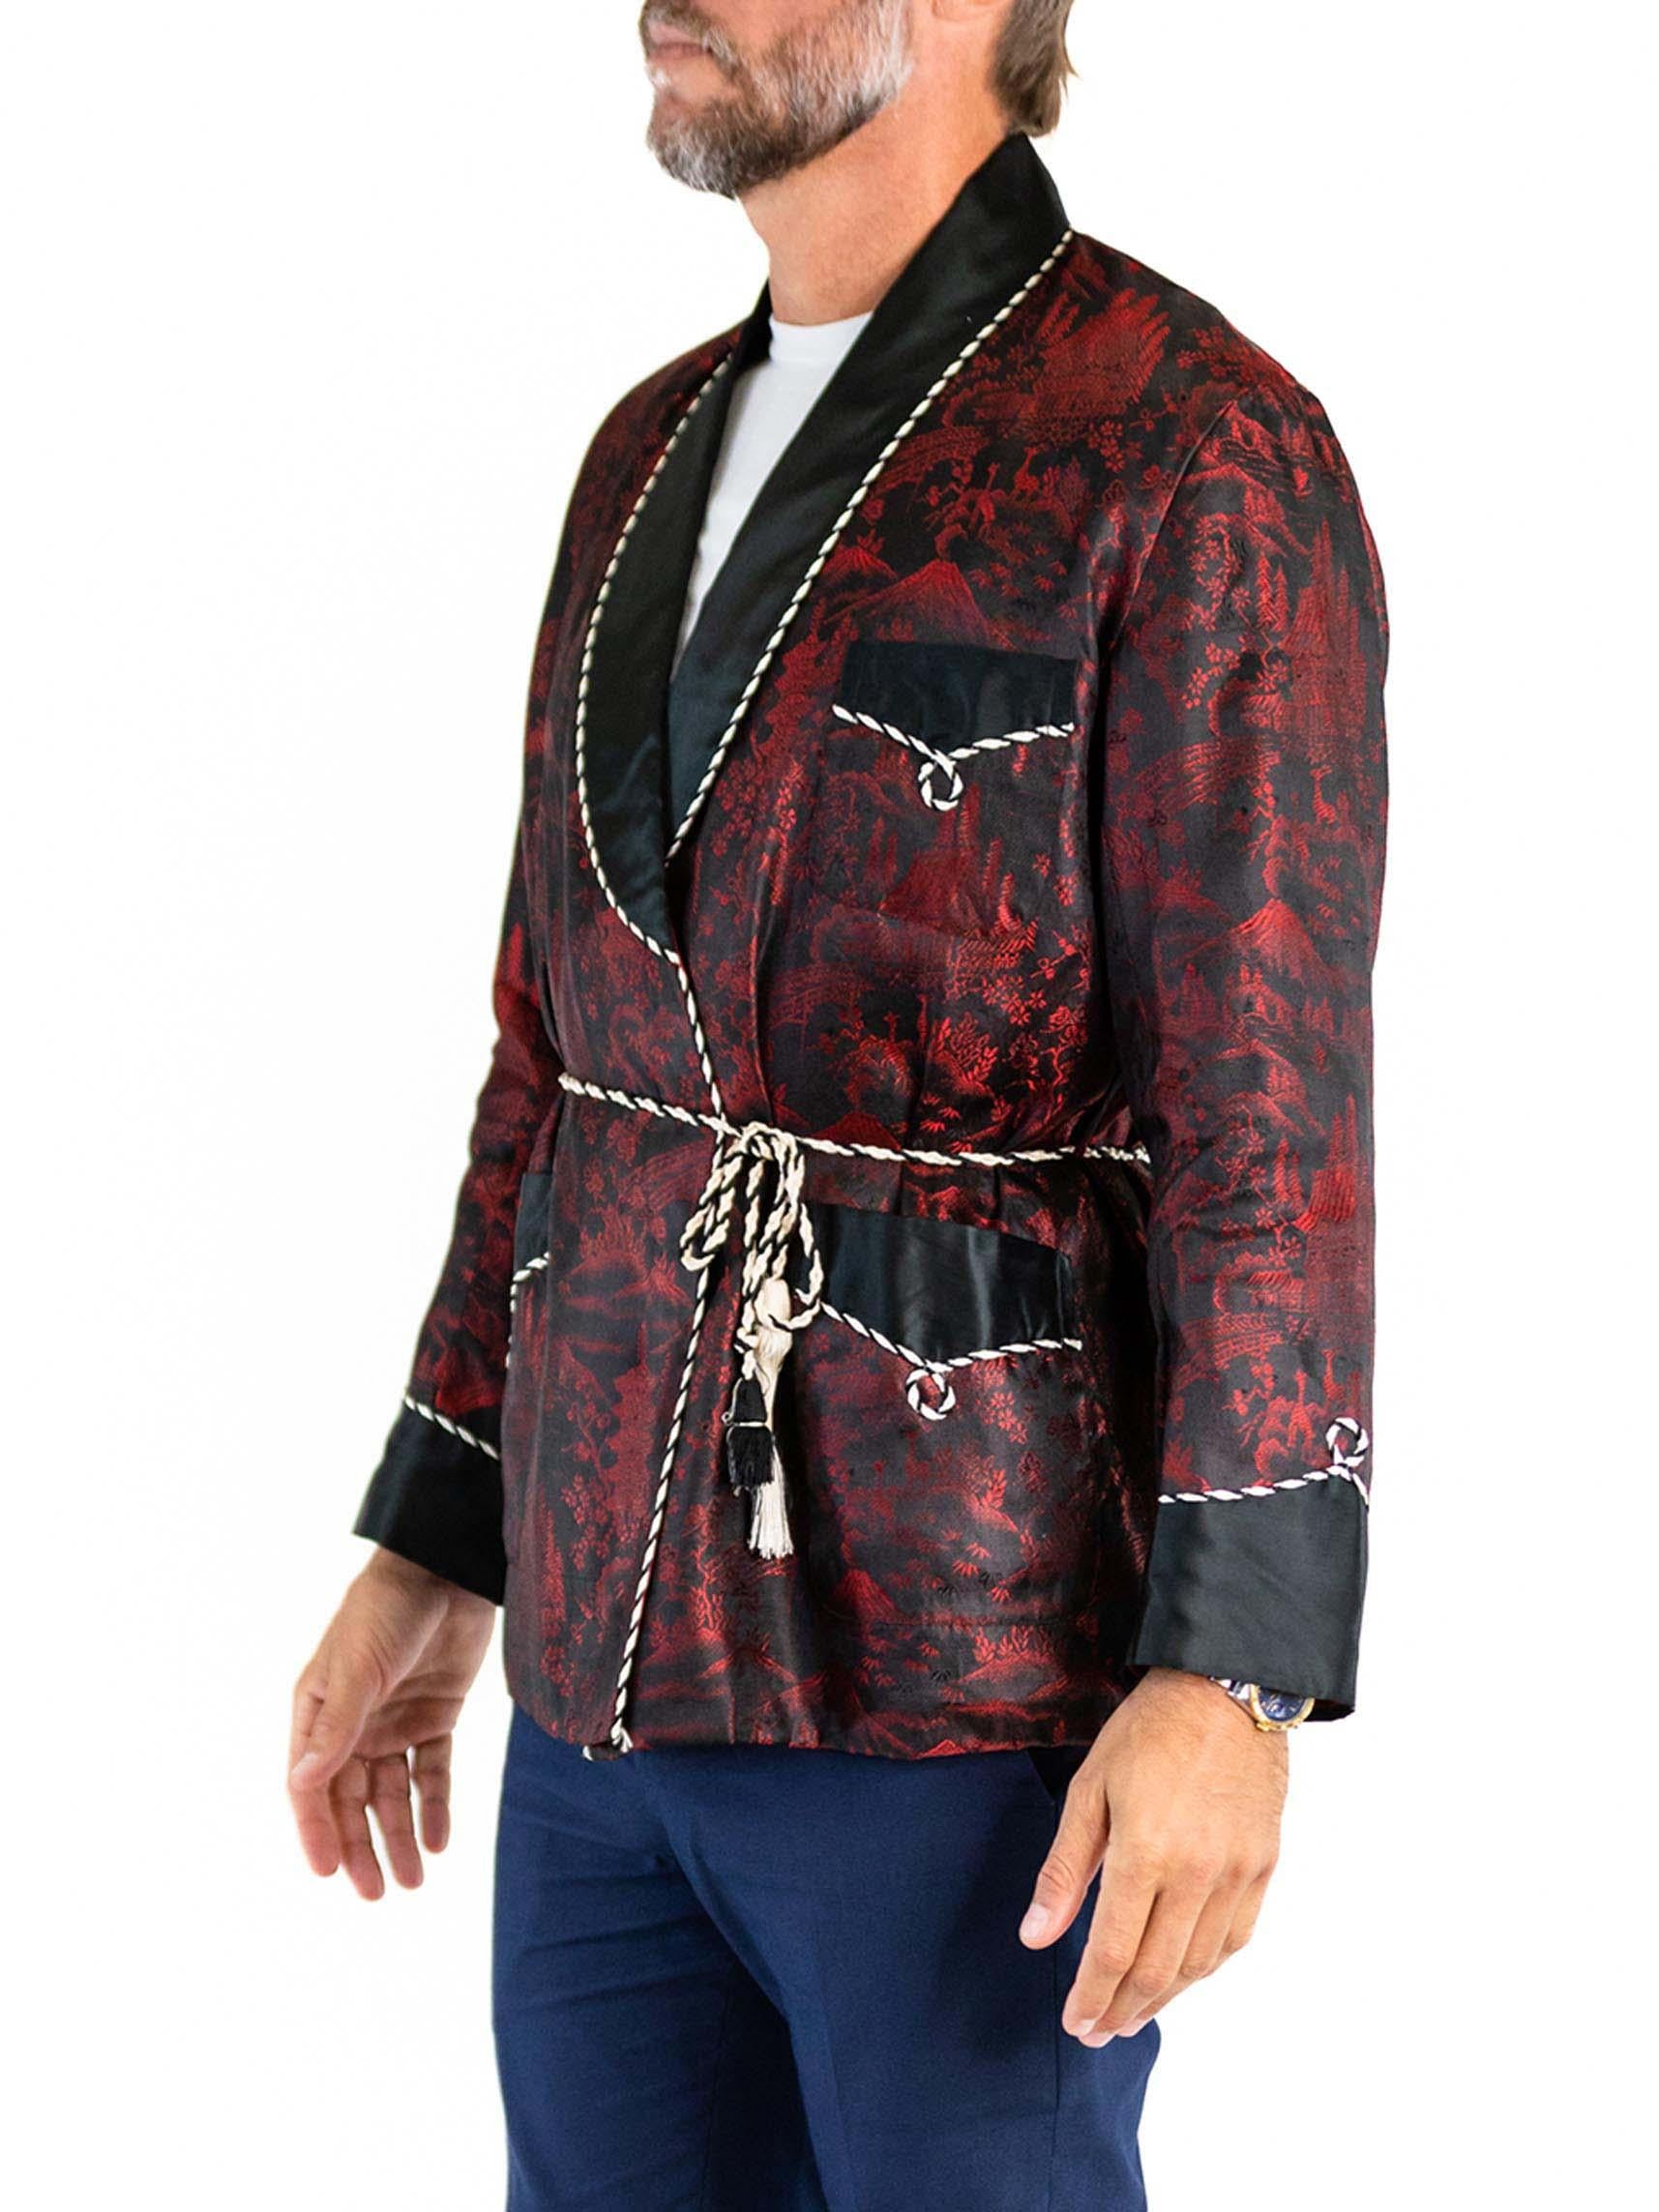 Men's 1950S Black & Red Rayon Blend Jacquard Japanese Scenic Smoking Jacket With Rope